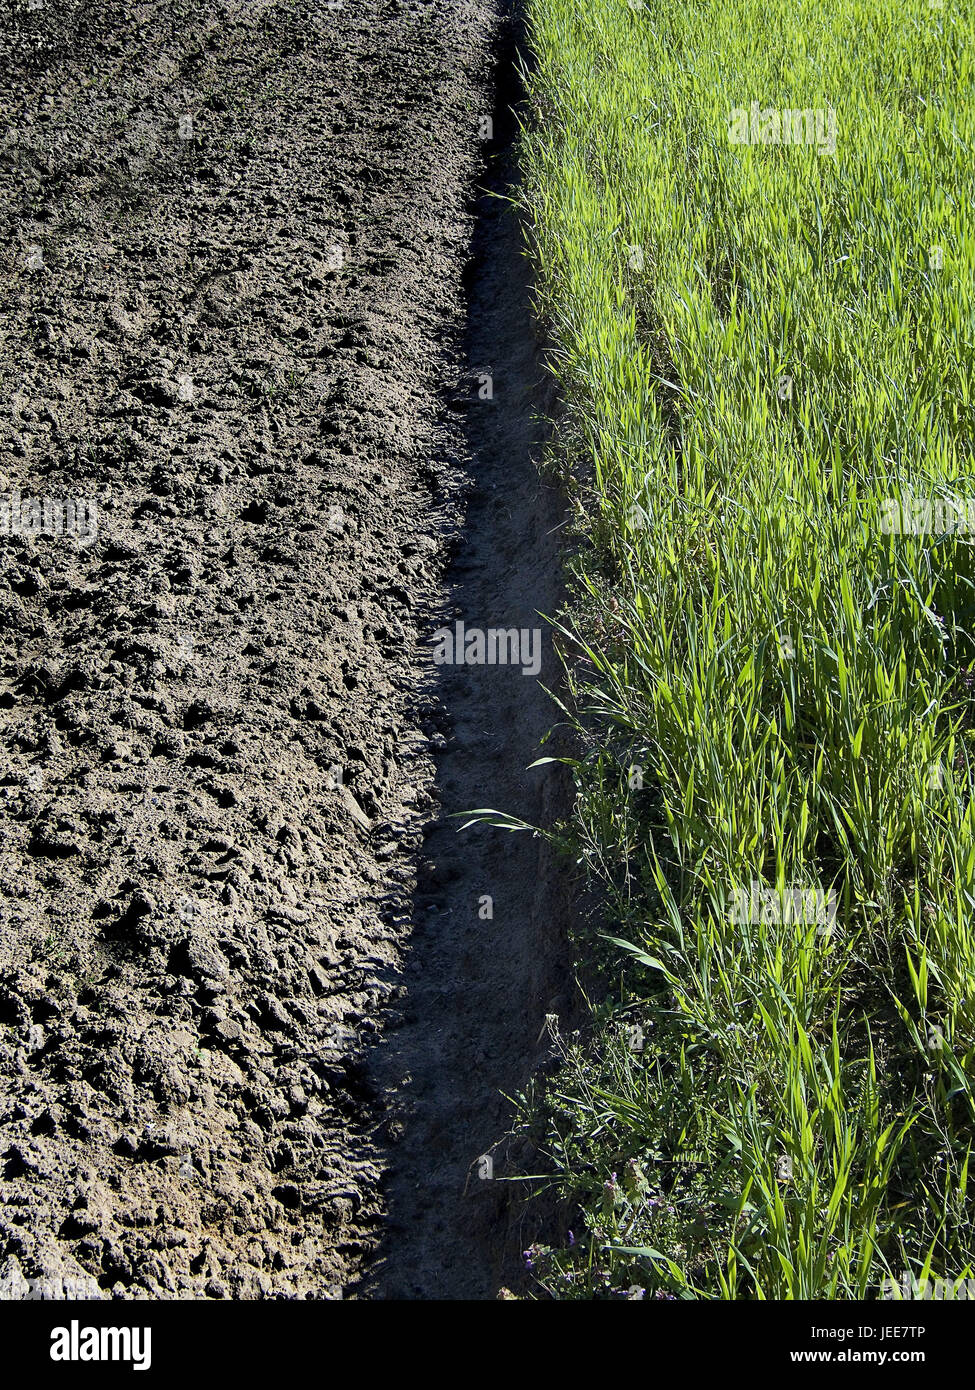 Field, field, detail, economy, agriculture, annex, agriculture, plants, useful plants, grass, meadow, green, ground, grey, broke, lie fallow, unplanted, plants, differently, contrast, Stock Photo